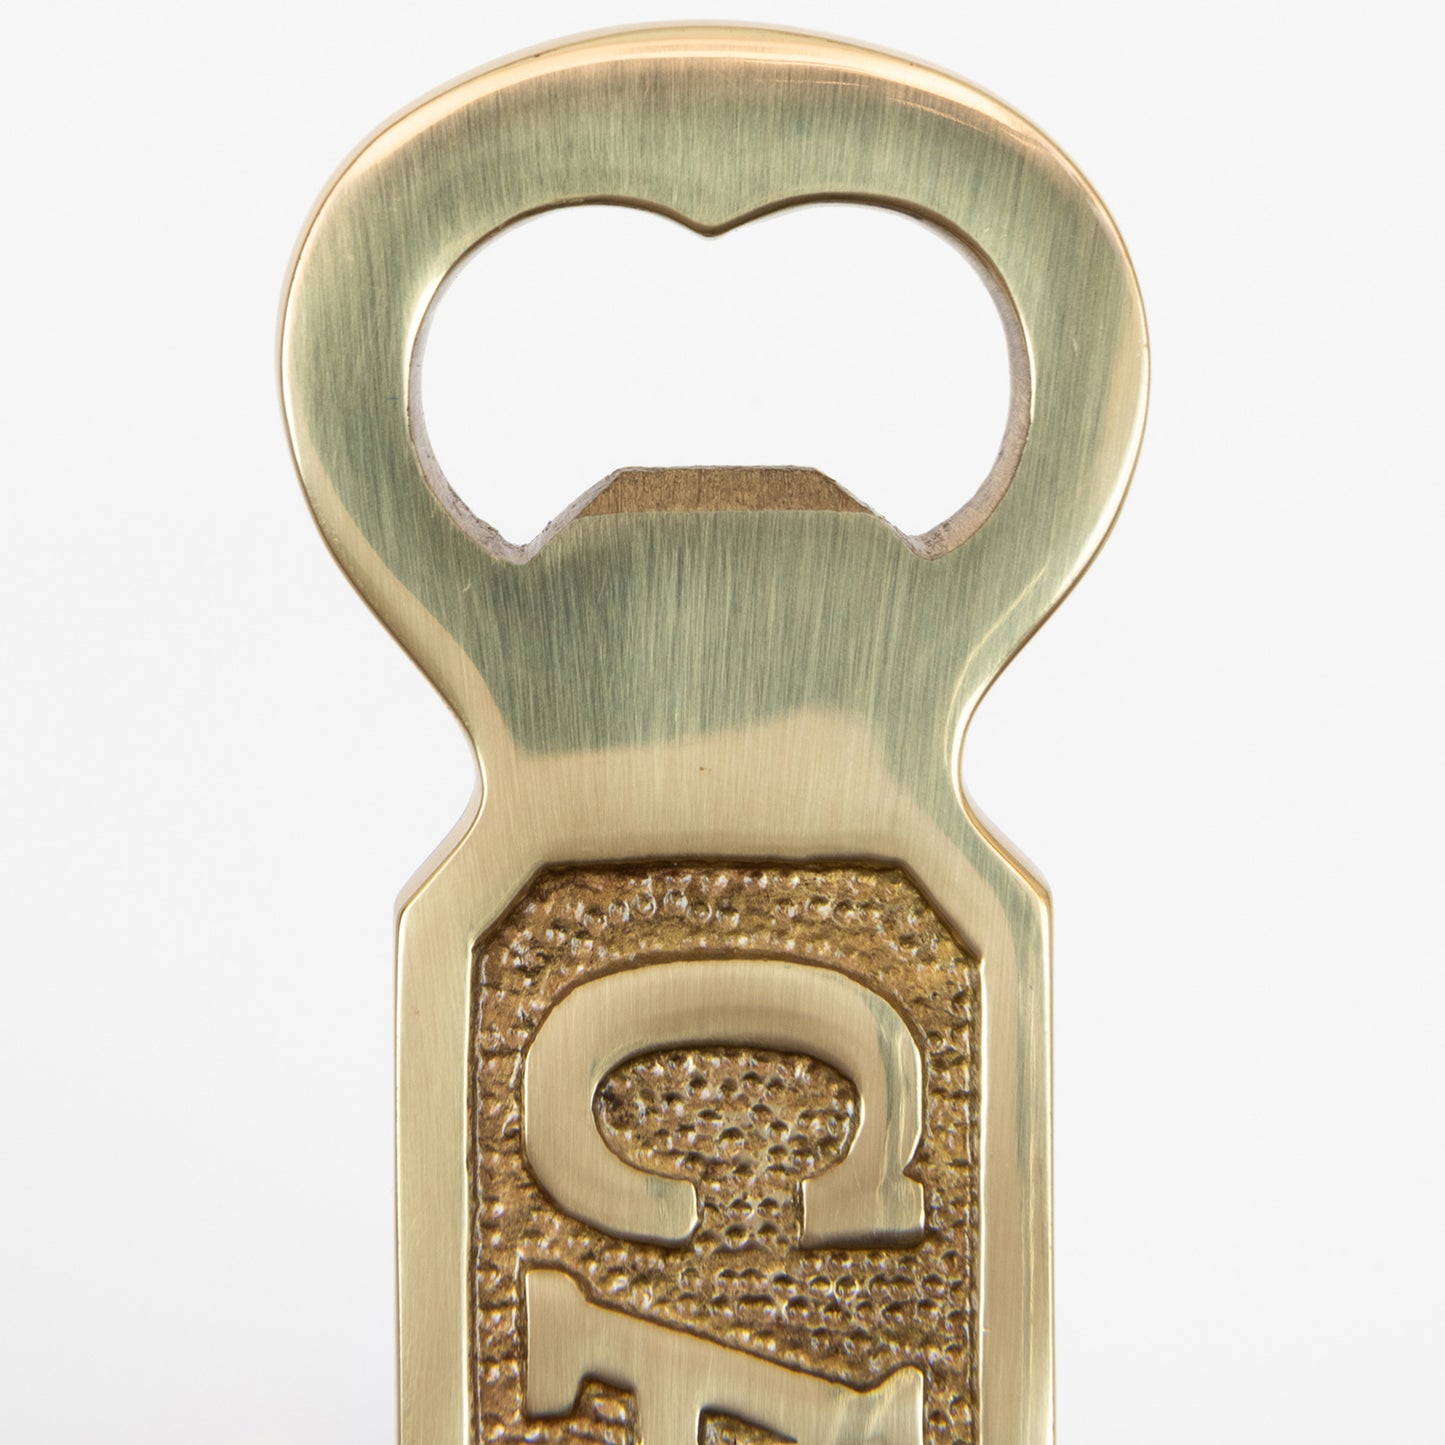 A close-up of a solid brass bottle opener with 'Captain' written on it. Photographed on a white background.